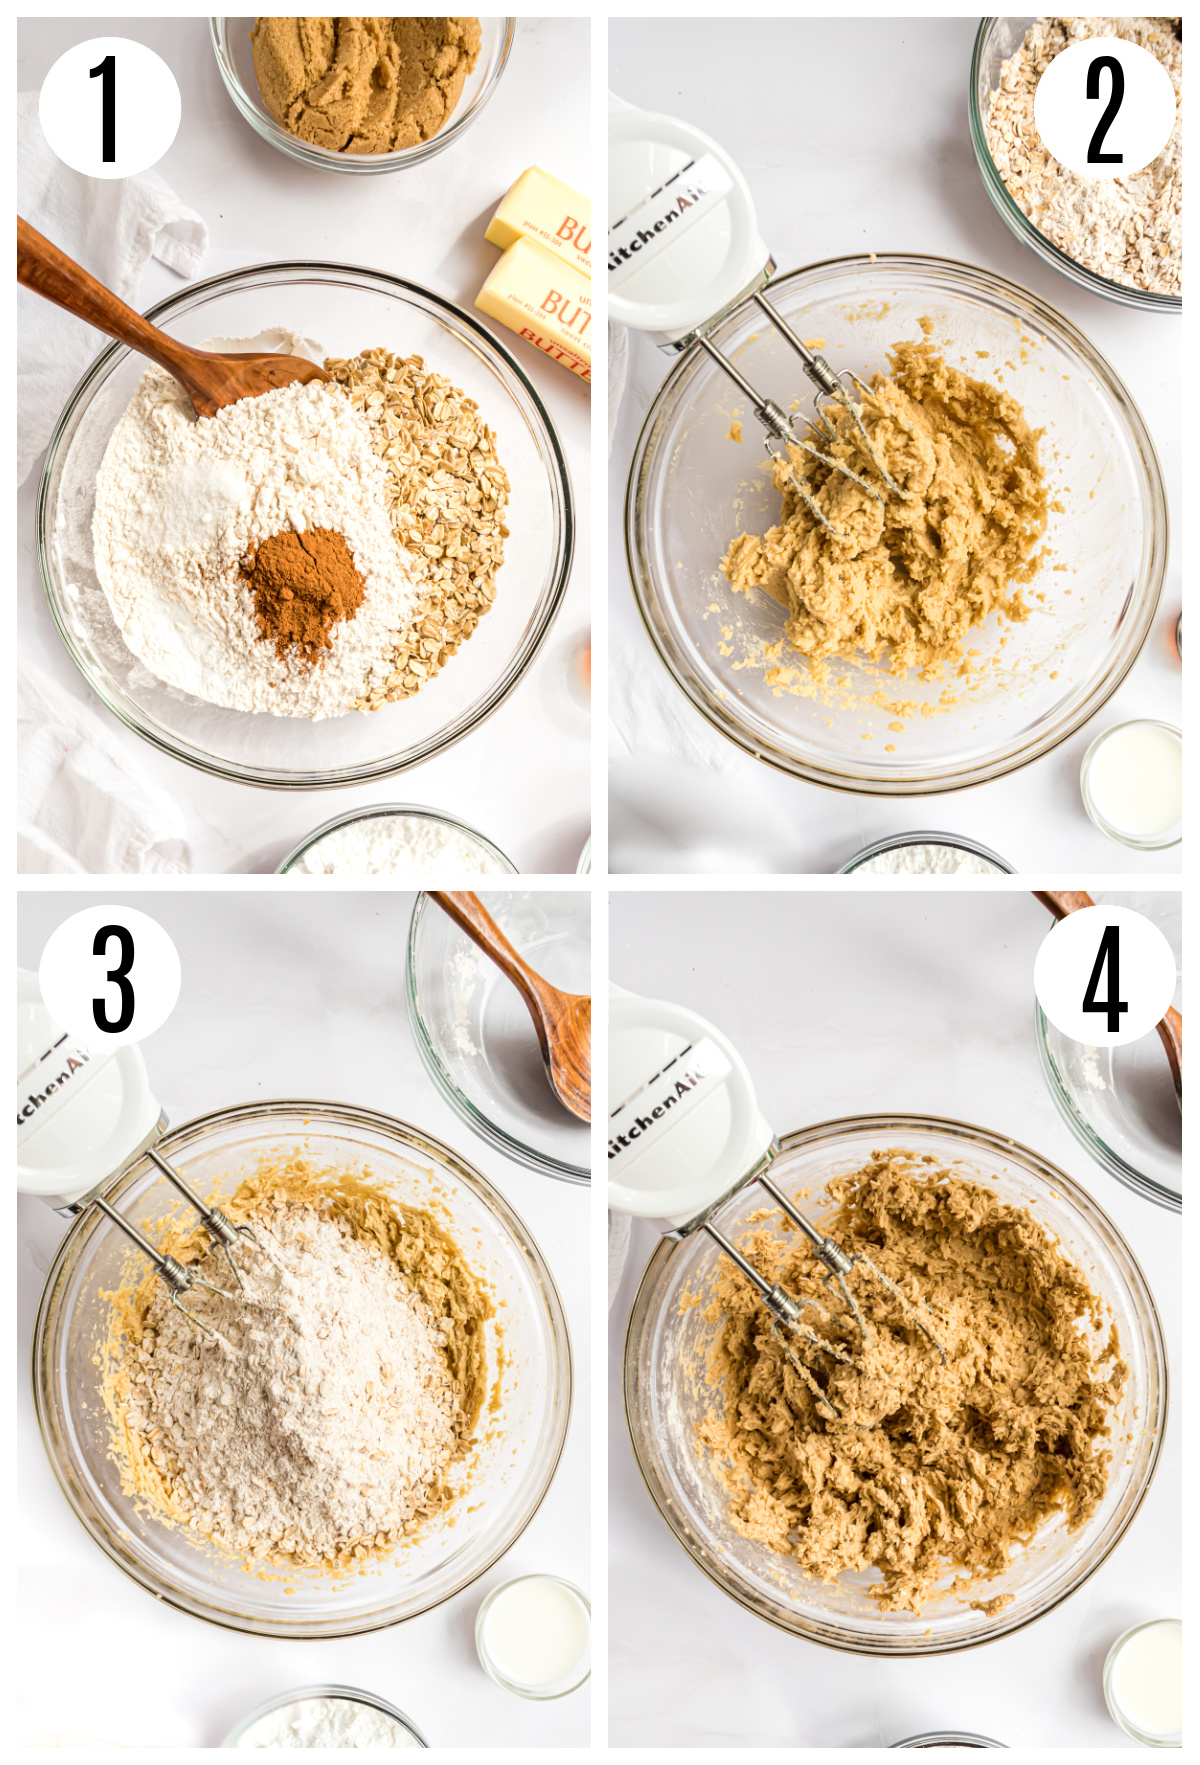 A collage of 4 photos showing the first steps to make the cookie dough including: combining the dry ingredients in a mixing bowl, creaming the butter and sugars together, and mixing the dry ingredients in with a hand mixer to form the dough.